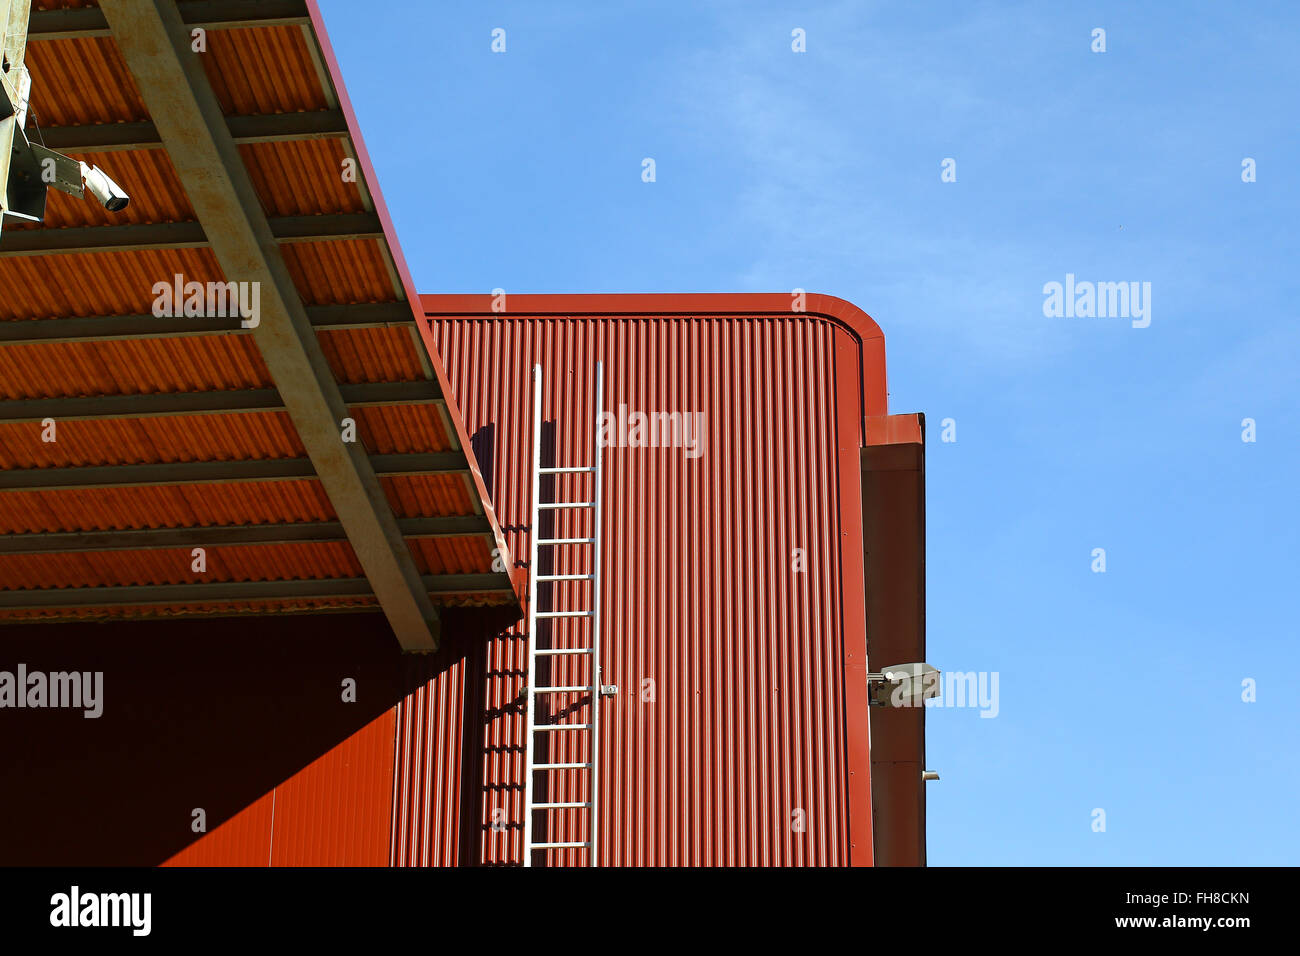 Details of aluminum facade panels on a commercial depot Stock Photo